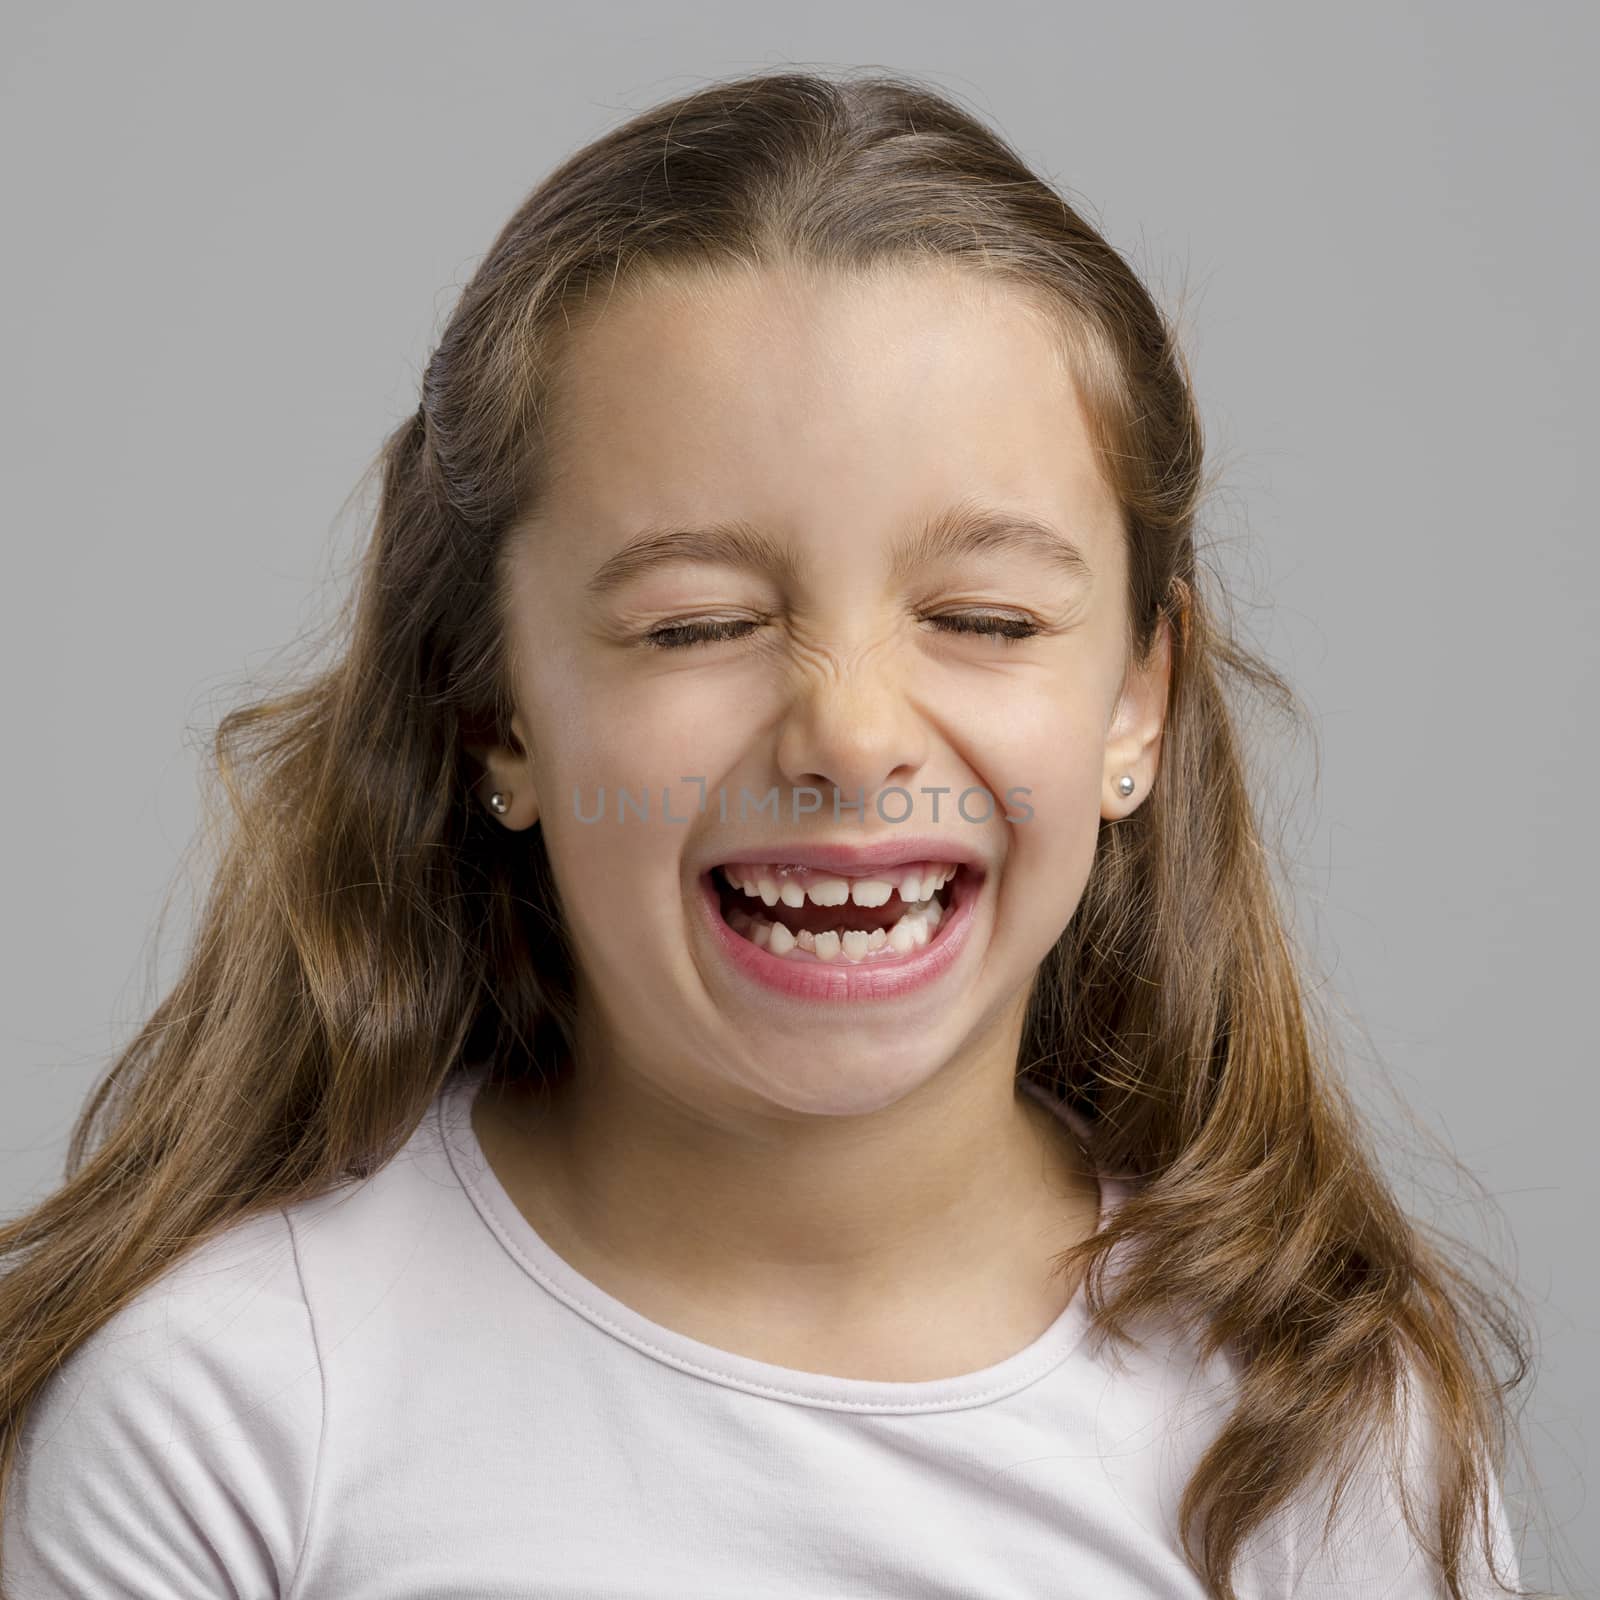 Portrait of a little girl with a laughing expression